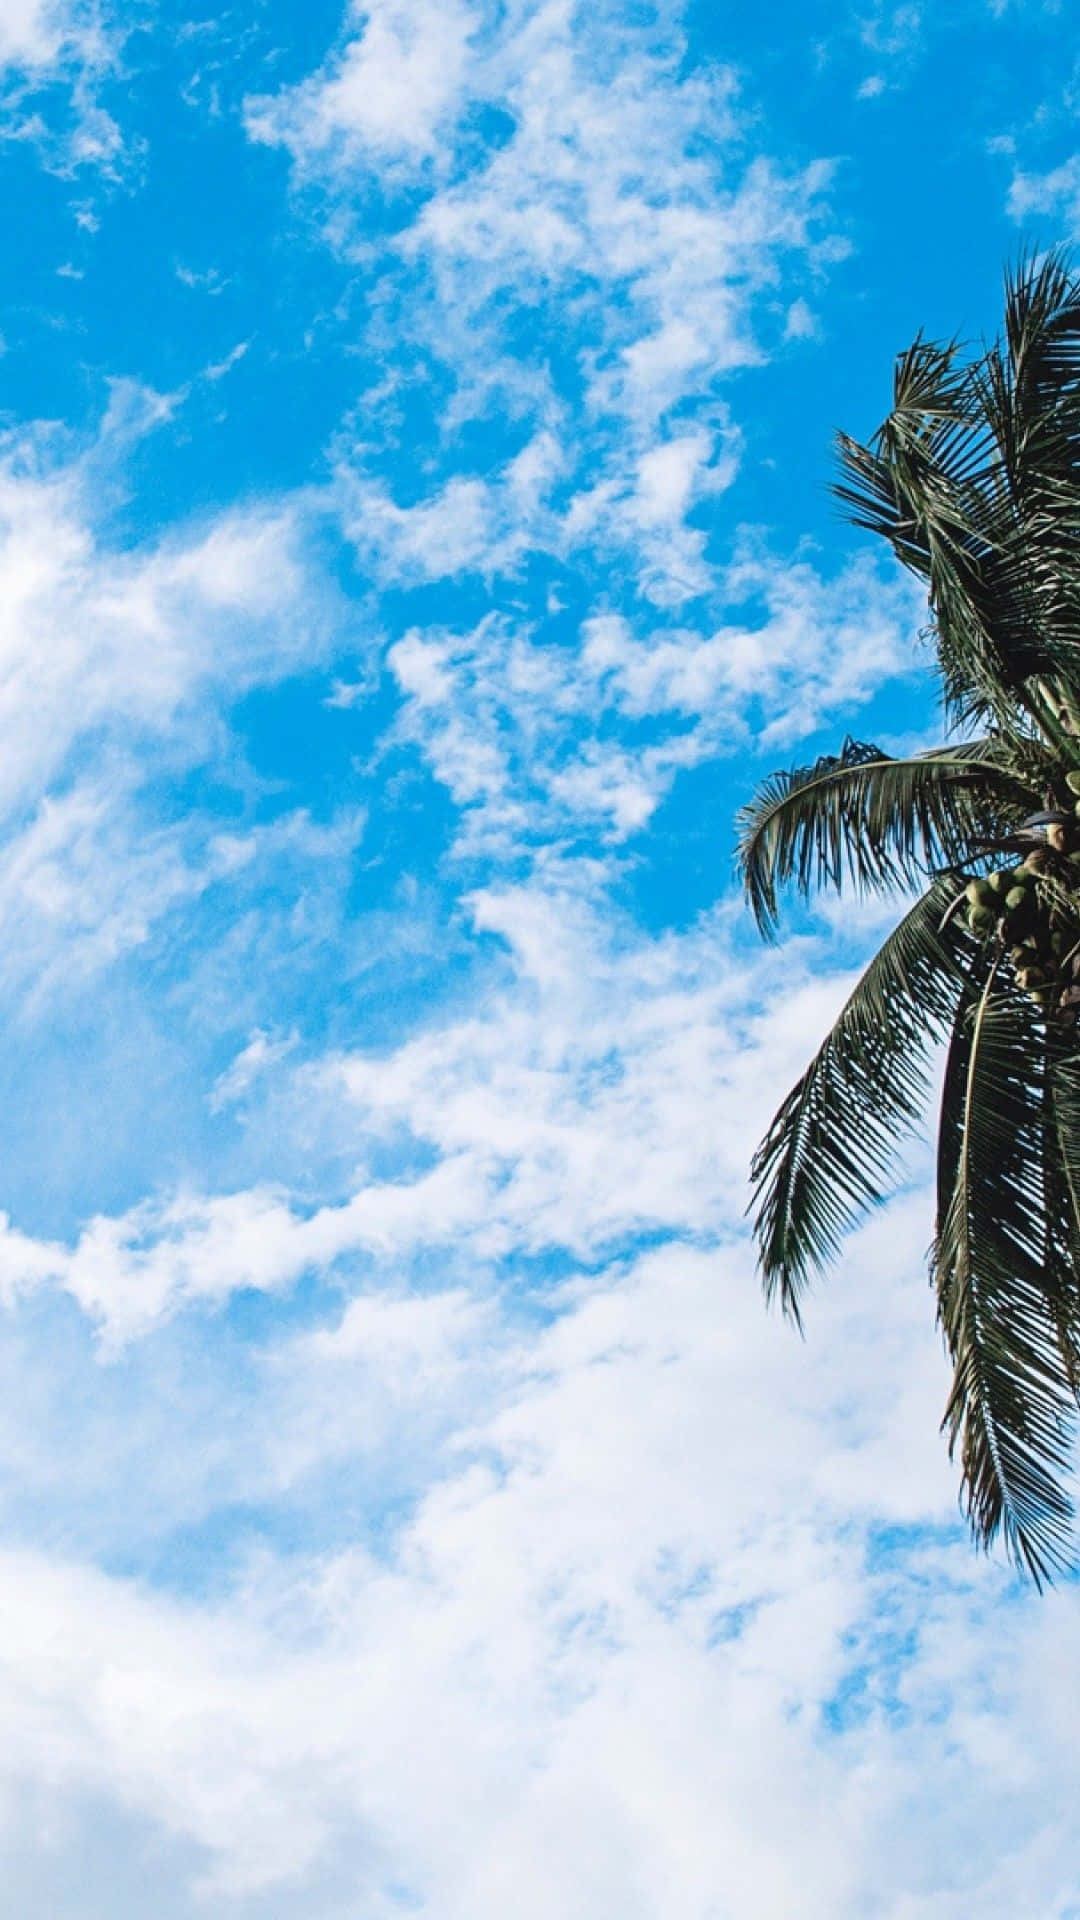 Get Ready for the Beach with a Tropical IPhone Wallpaper